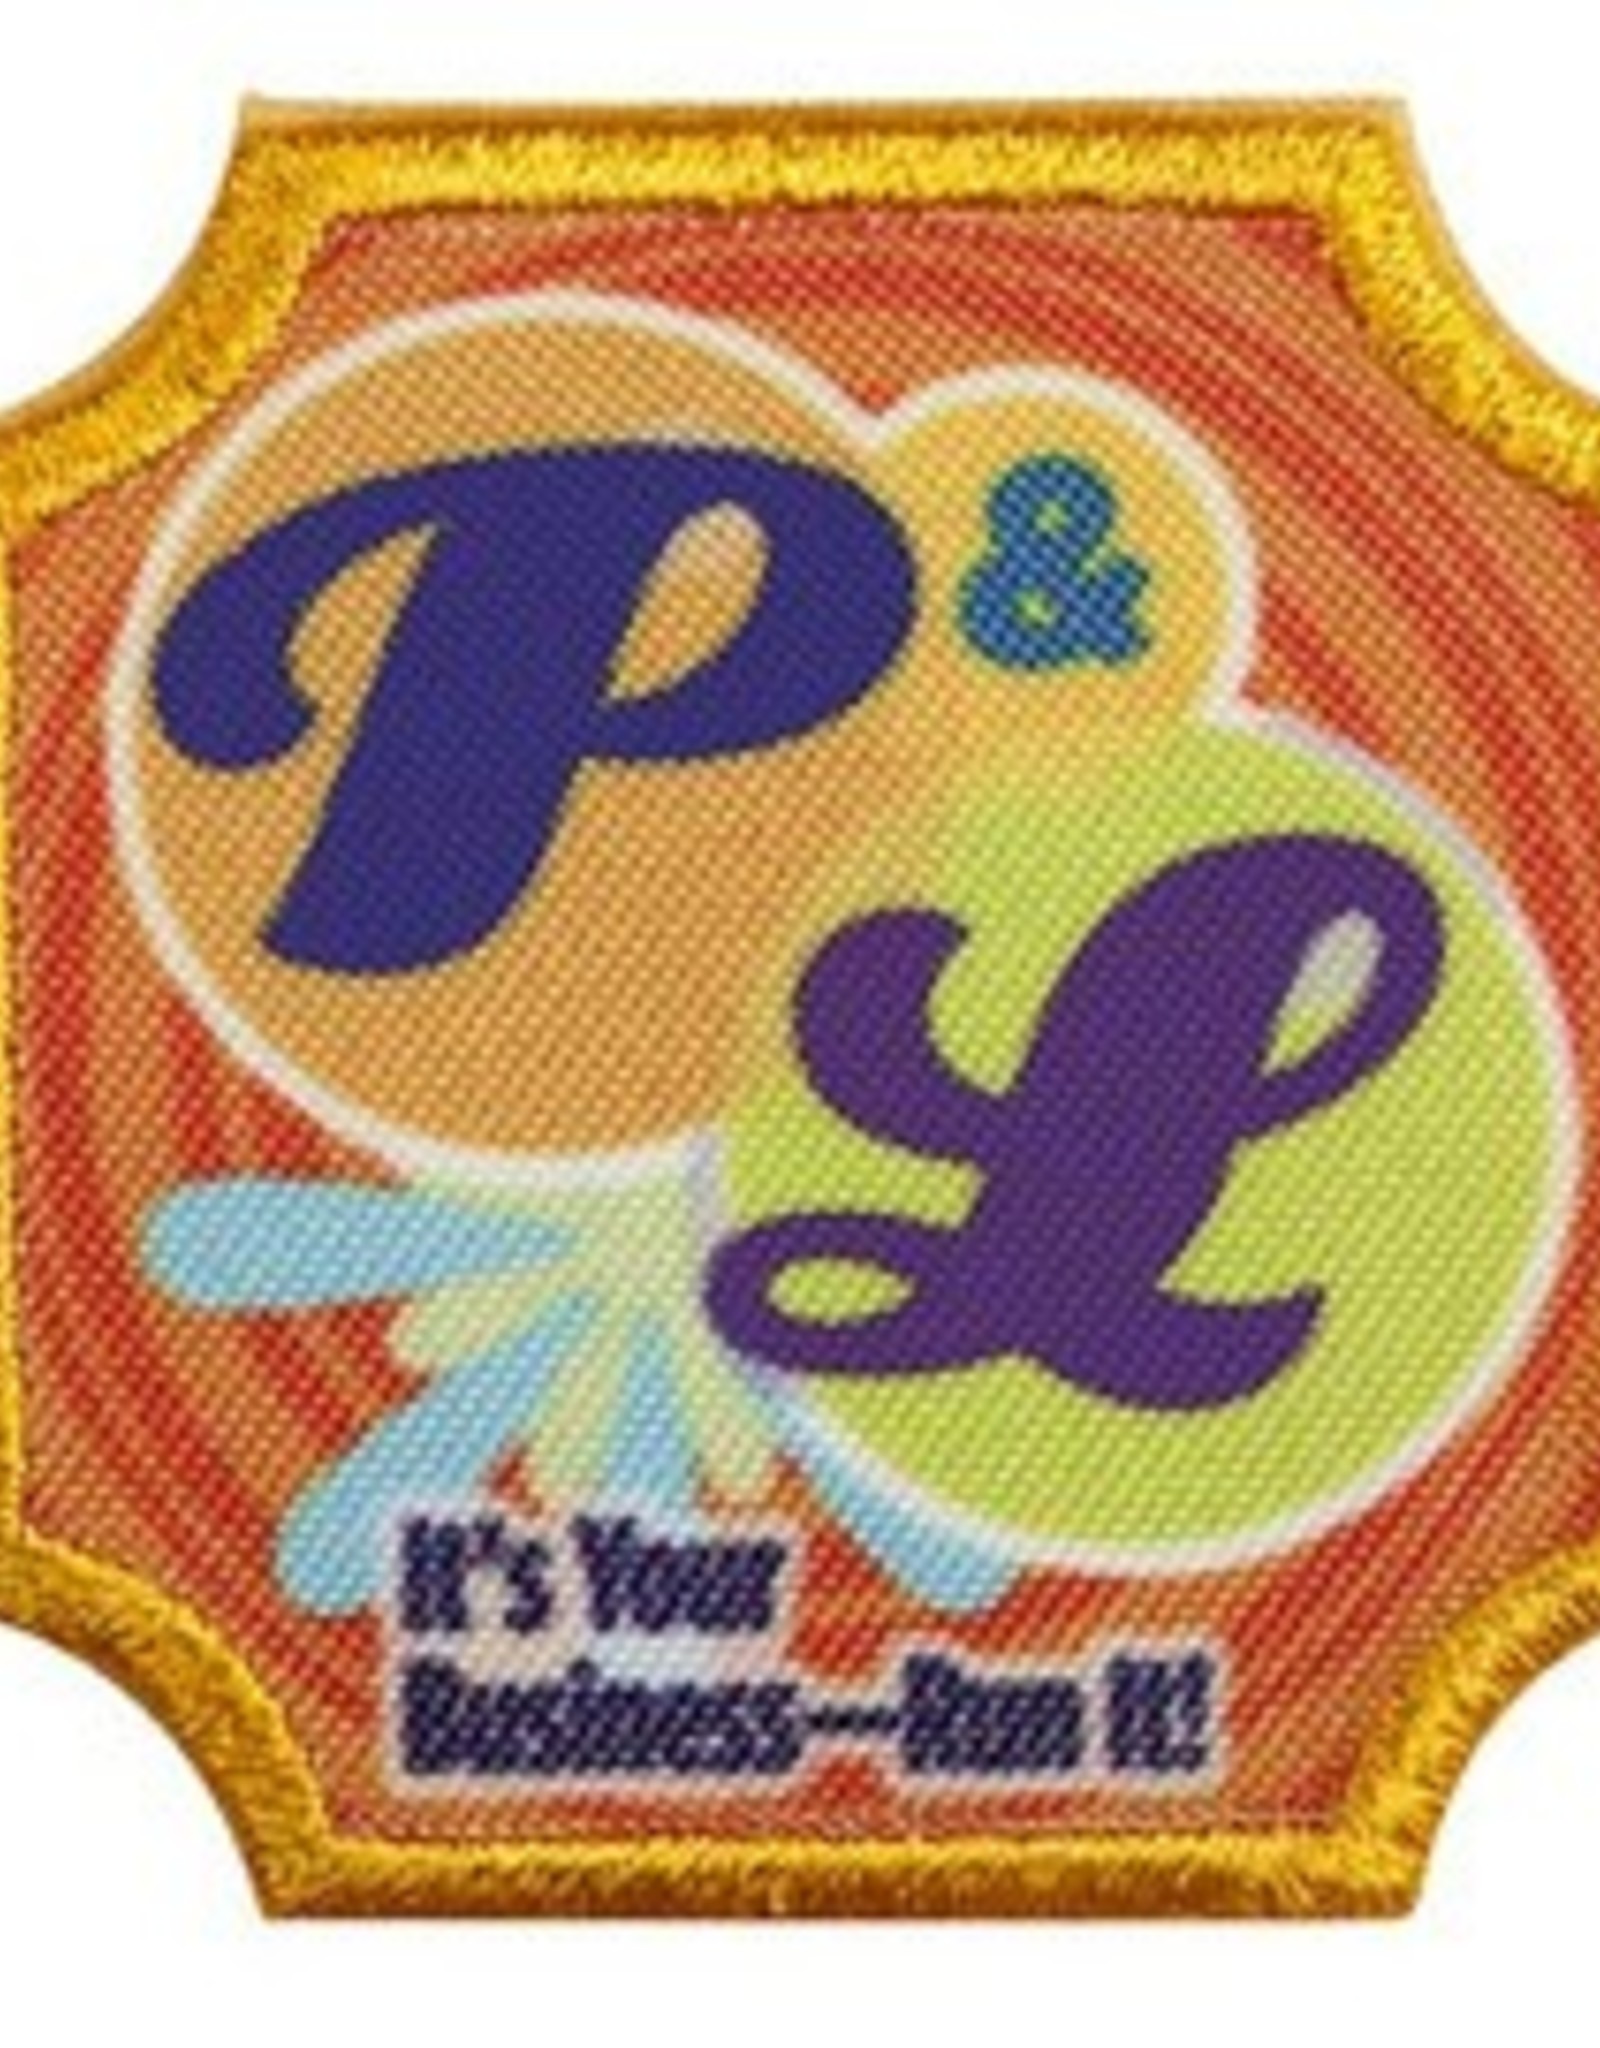 GIRL SCOUTS OF THE USA Ambassador P & L Badge